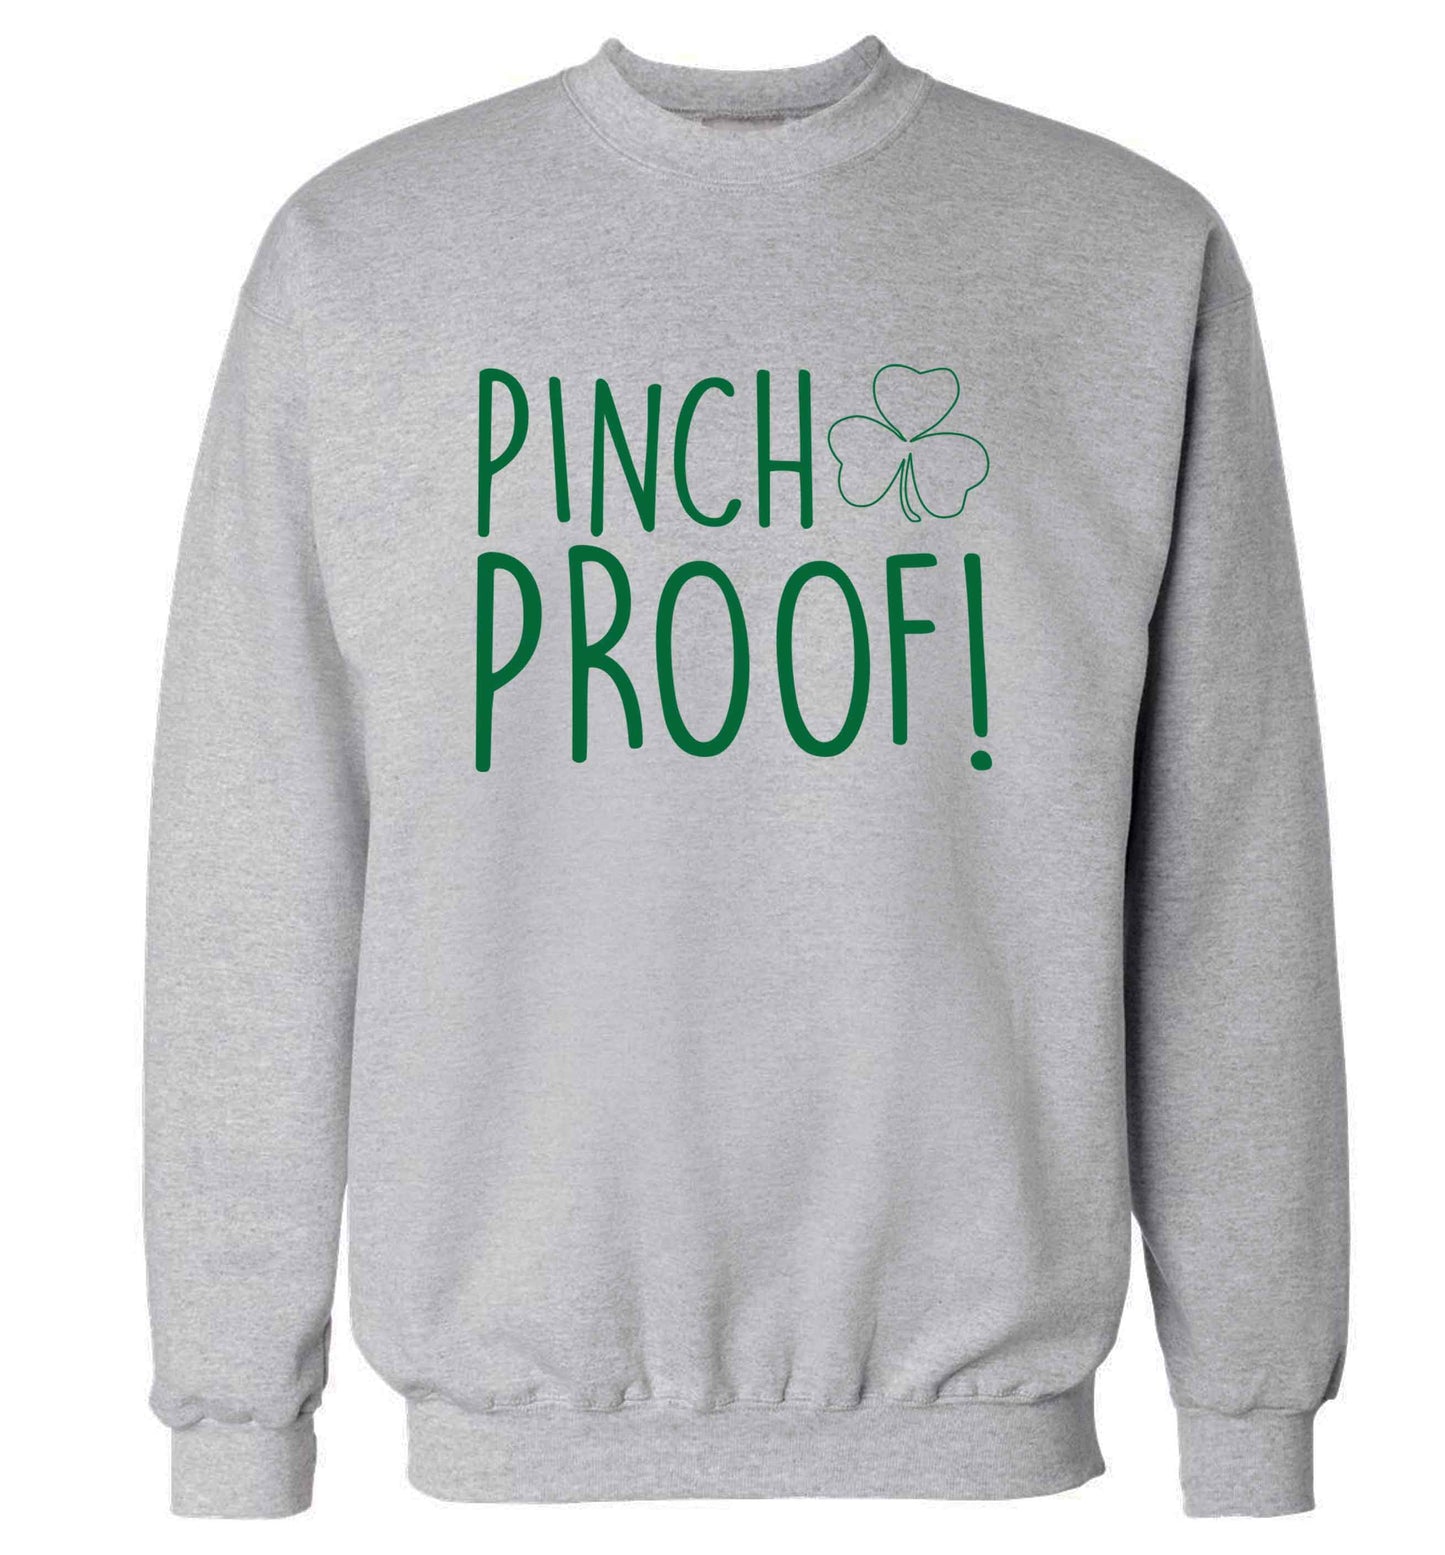 Pinch Proof adult's unisex grey sweater 2XL